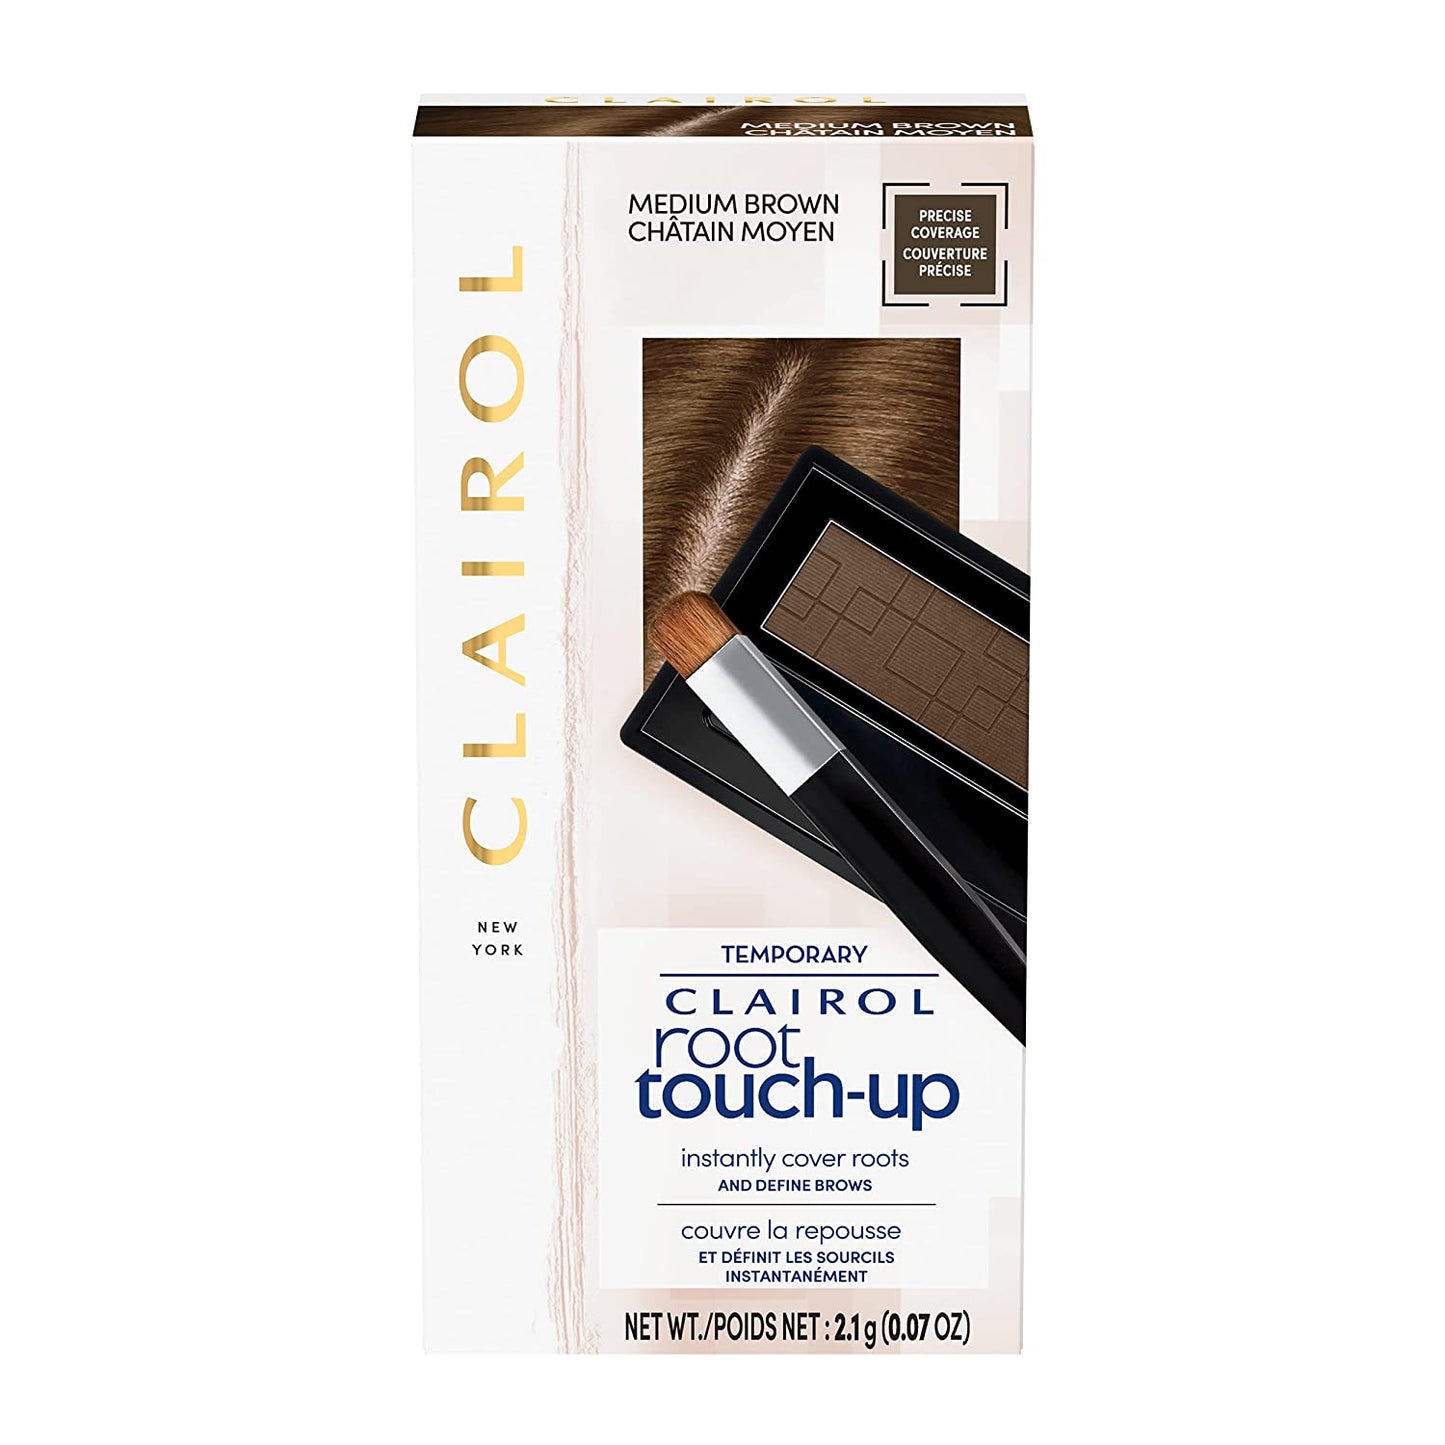 Clairol Root Touch-Up Temporary Concealing Powder, Medium Brown Hair Color, 0.07 oz. / 2.1 g